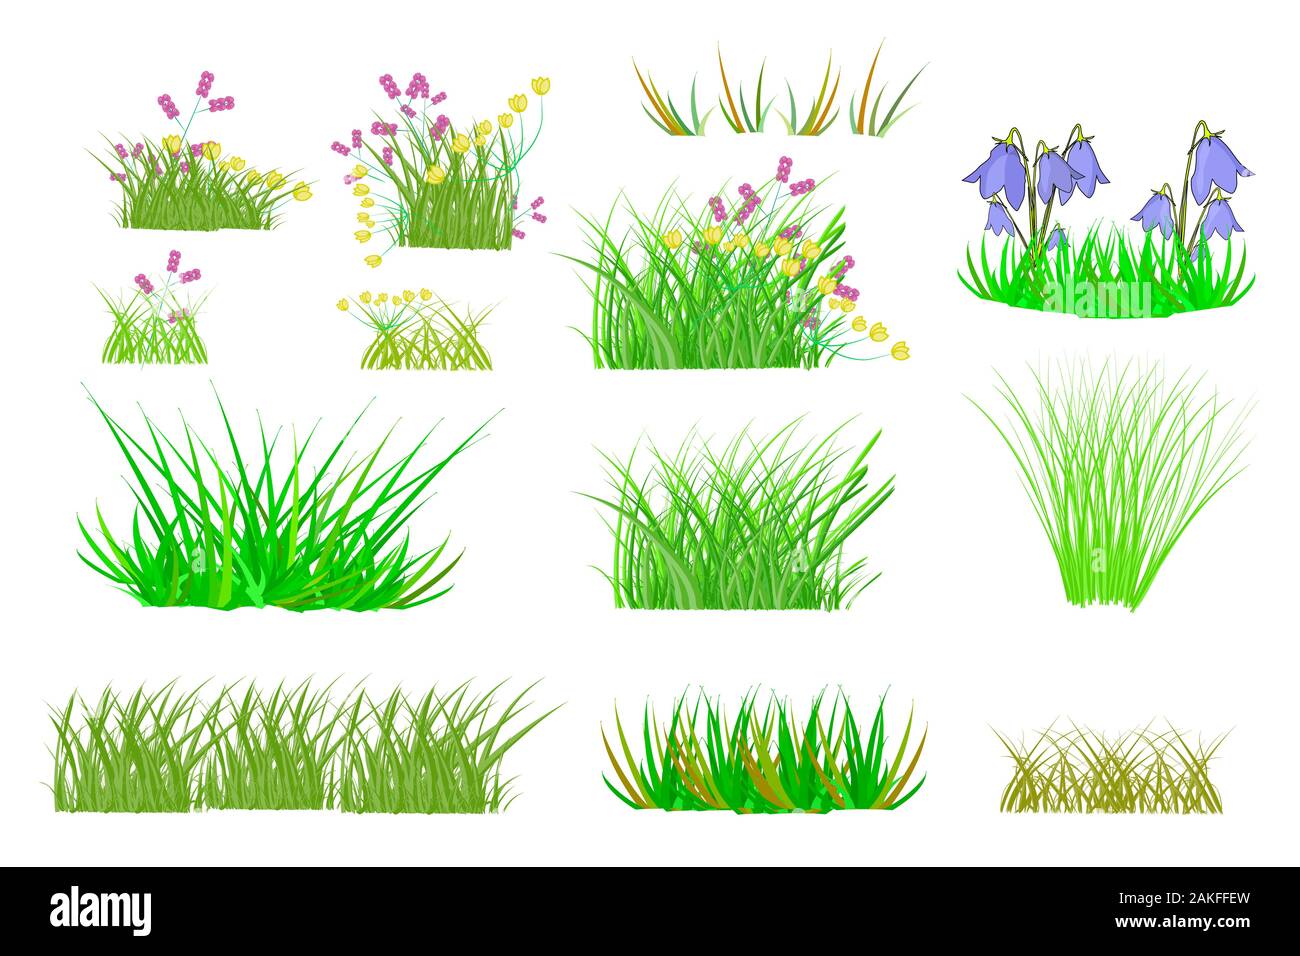 Grass set isolated on white background. Collection with summer green grass and flowers. Realistic green grass, fresh spring plants, different herbs, b Stock Vector